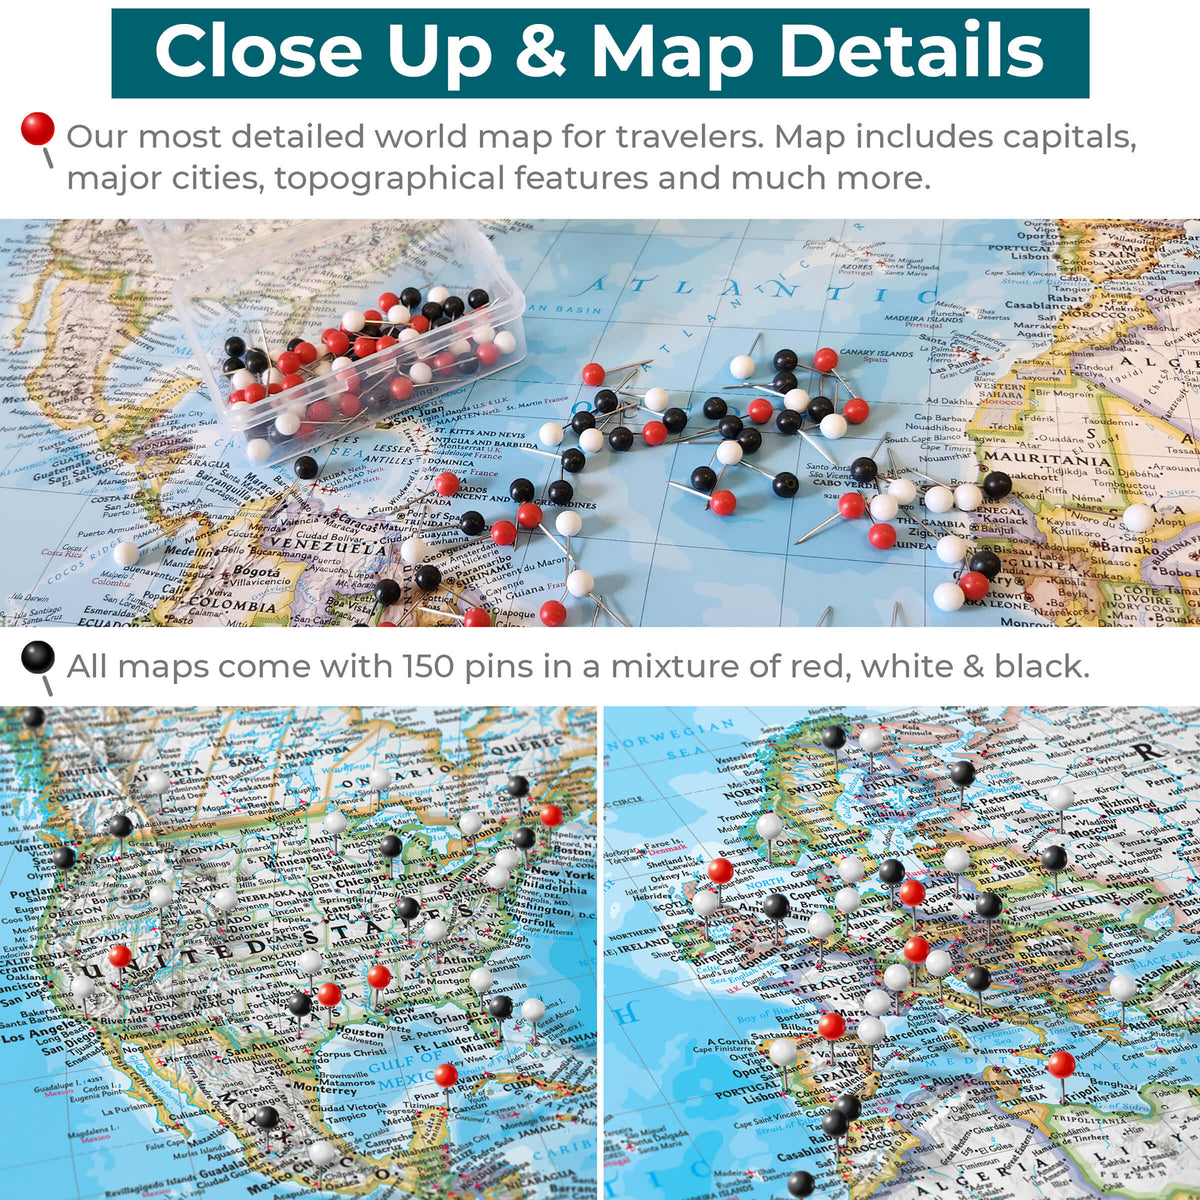 Classic World Push Pin Travel Maps - Close up and Details